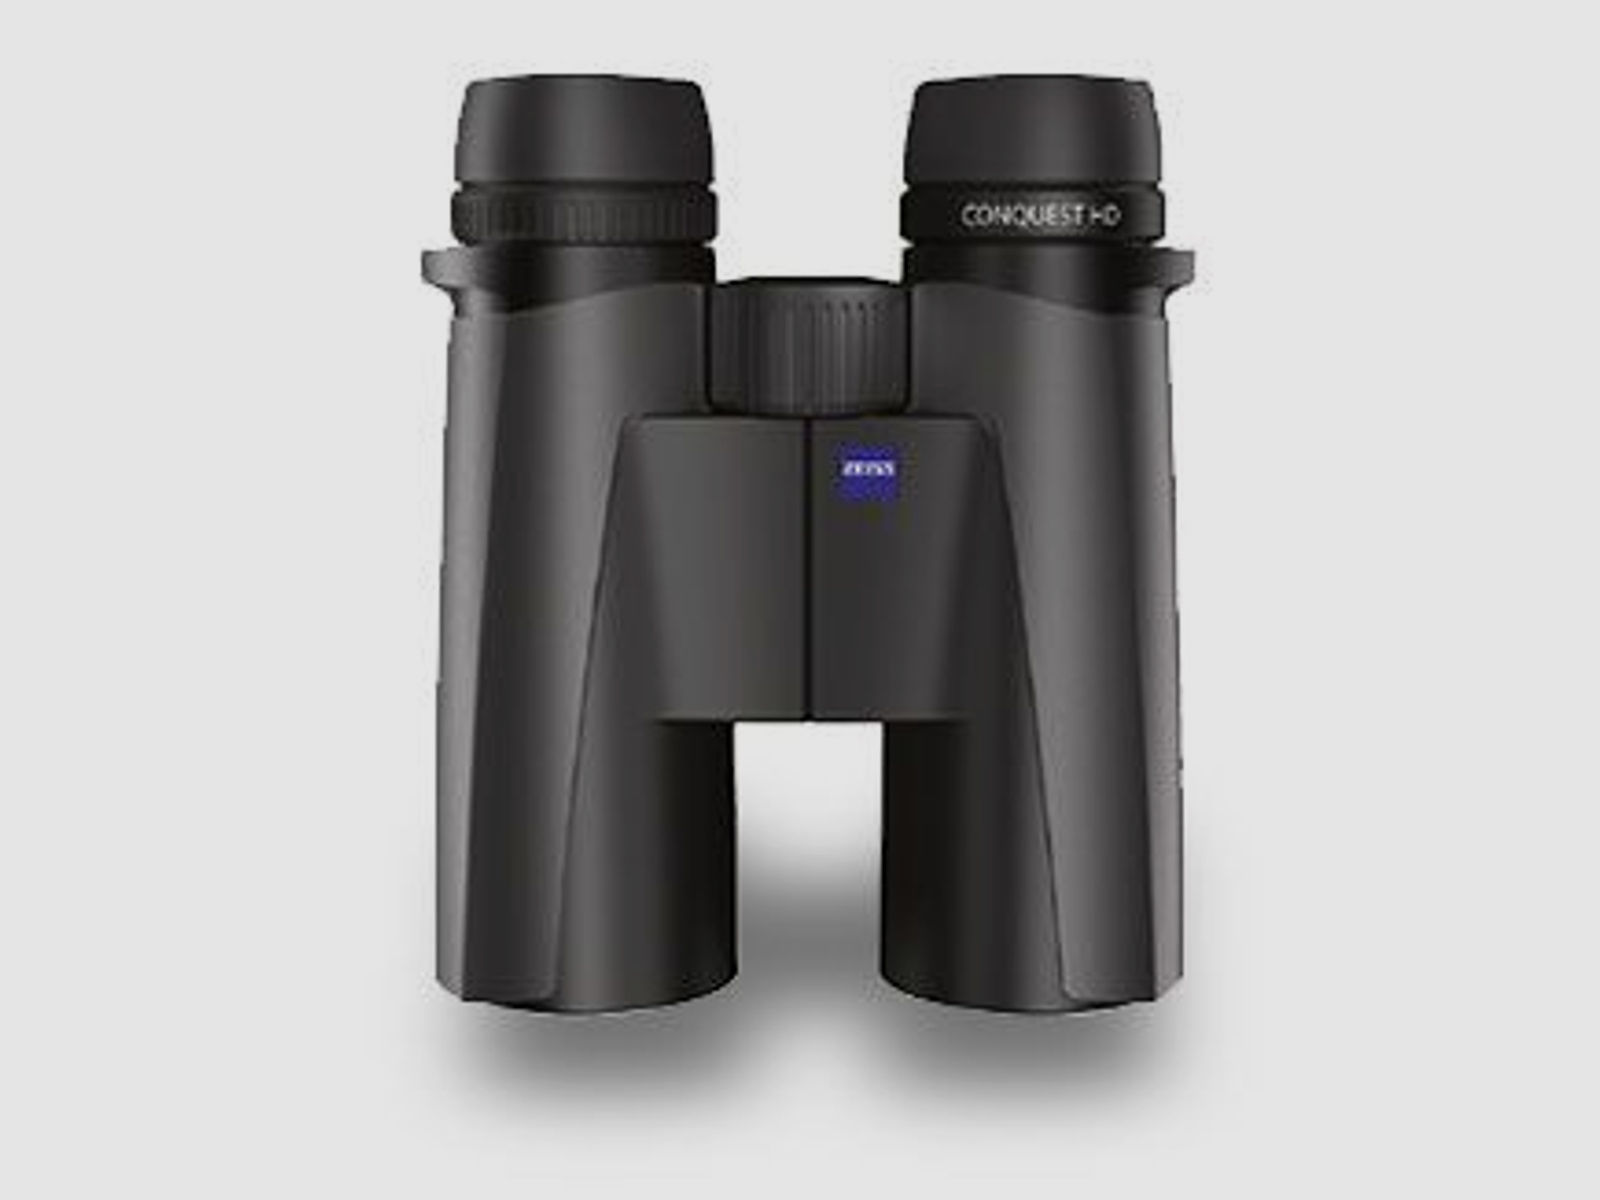 ZEISS Conquest HD 10 x 42 + Lens Cleaning Kit